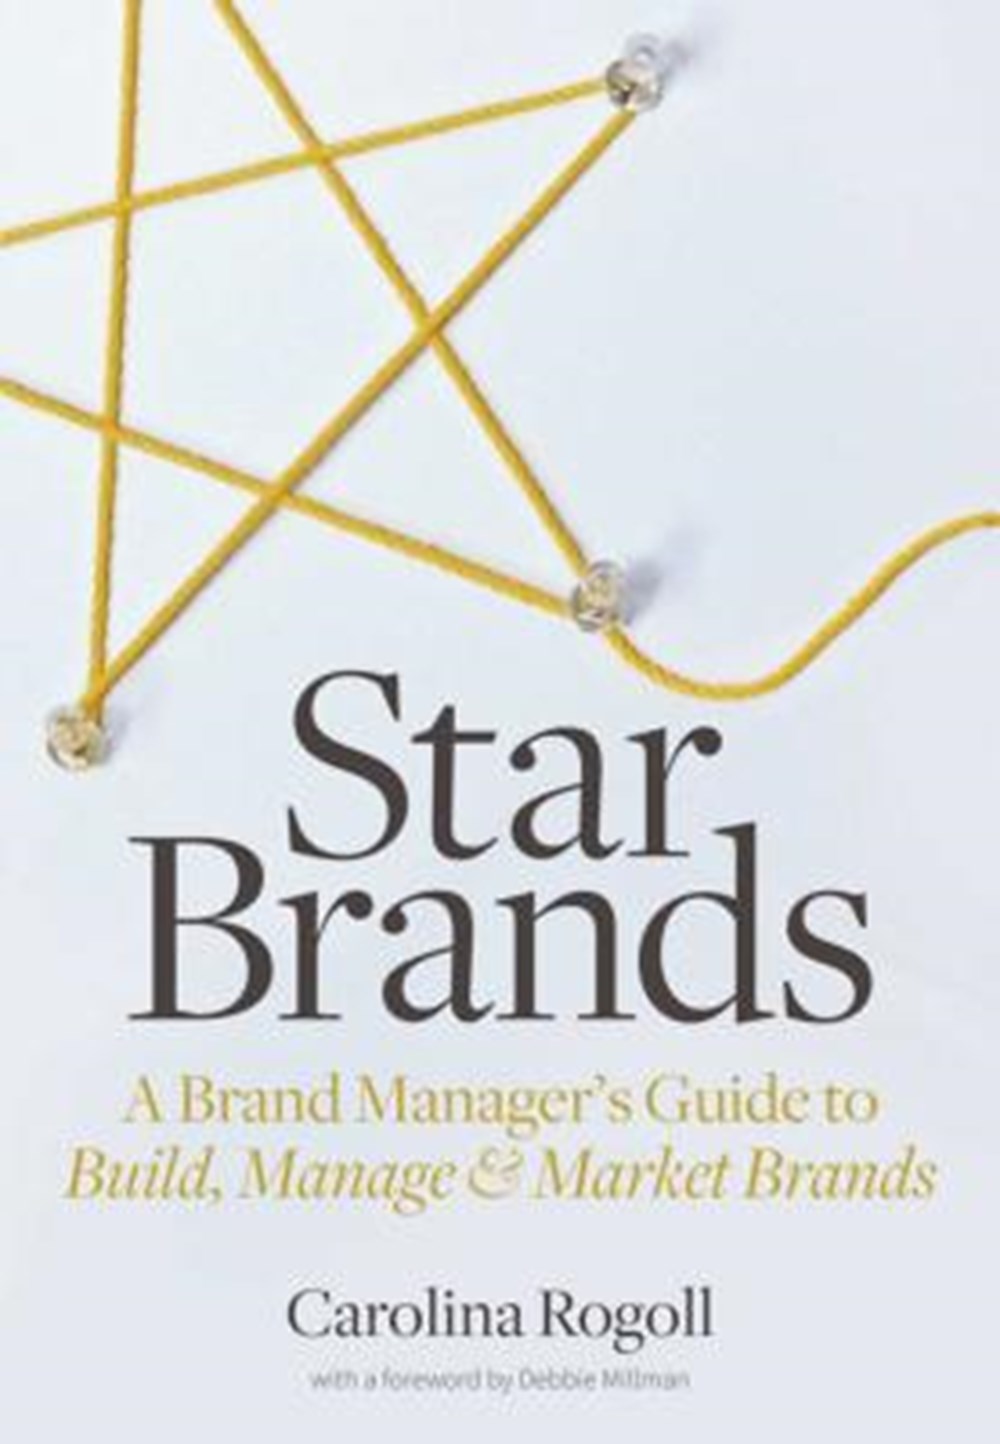 Star Brands A Brand Manager's Guide to Build, Manage & Market Brands